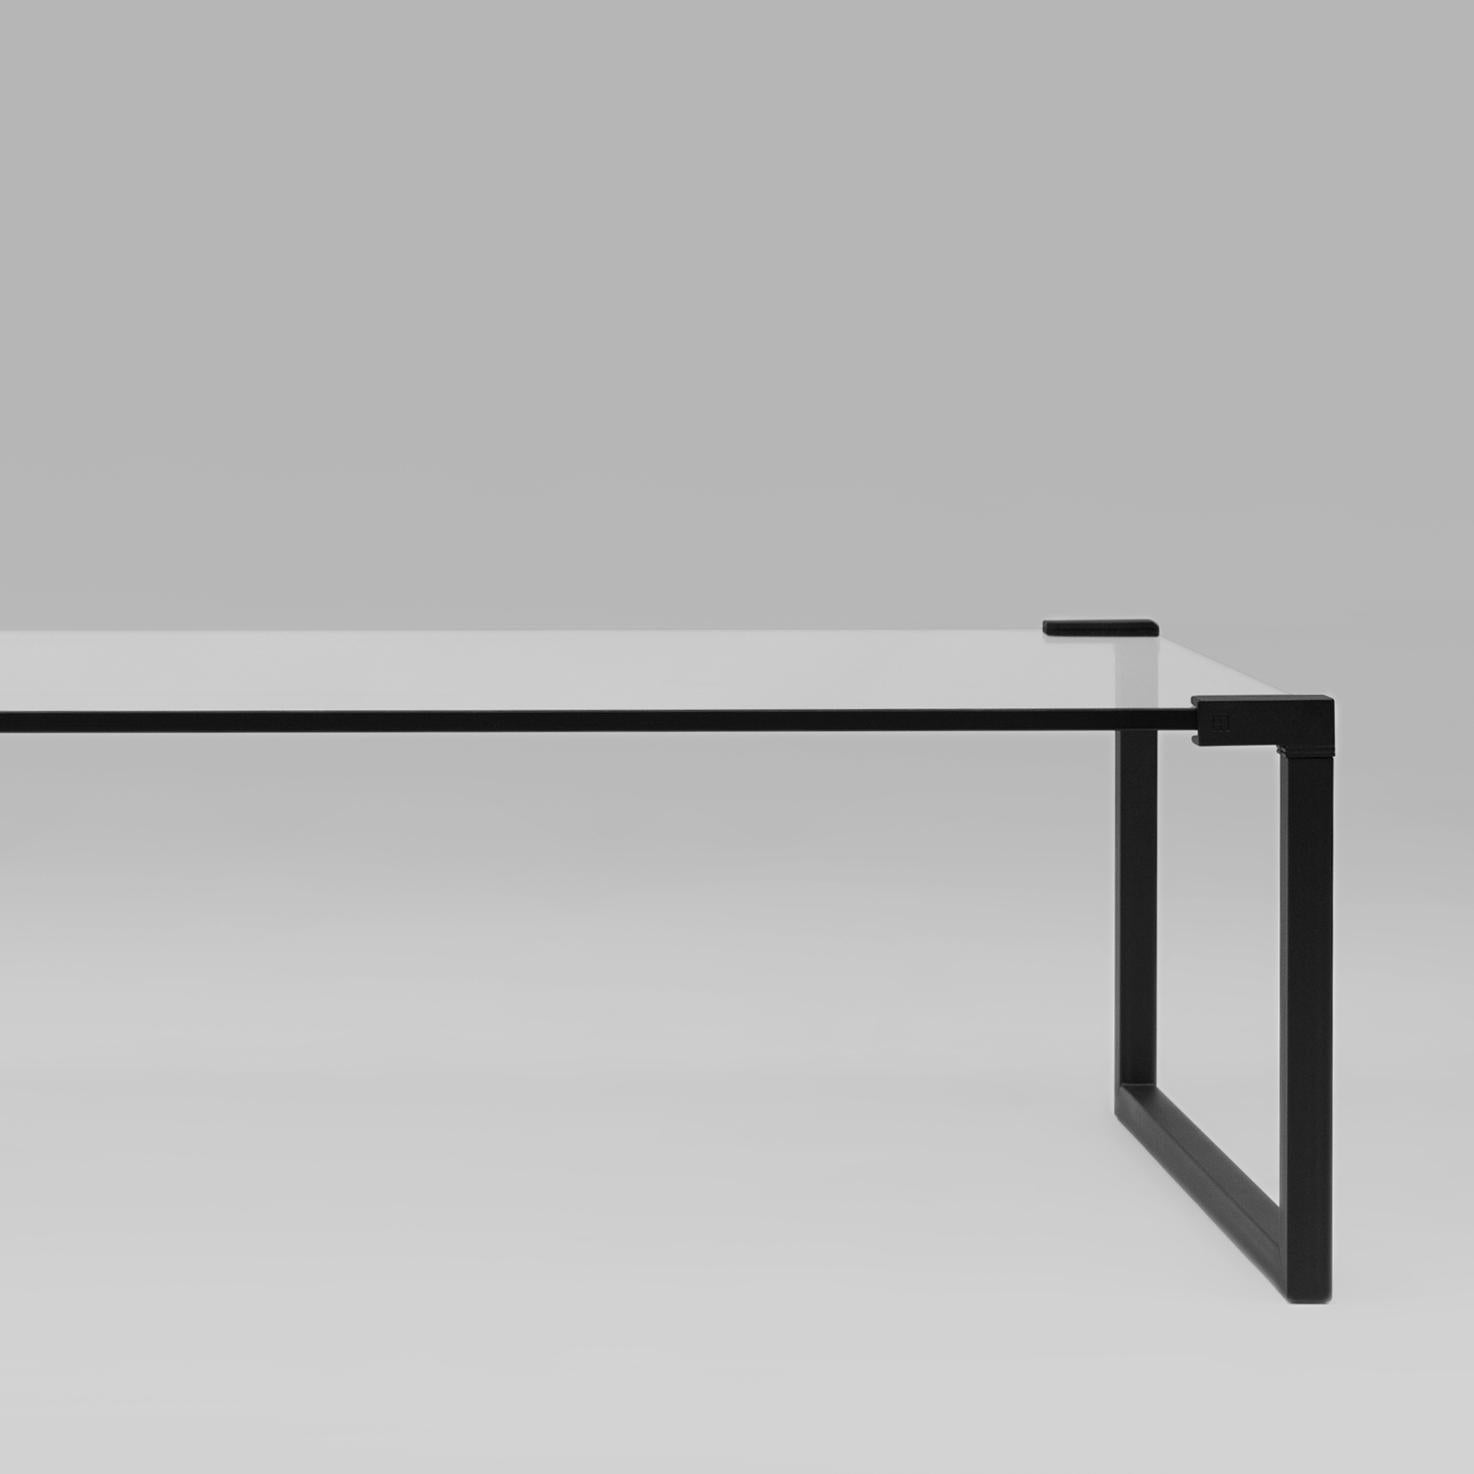 Minimalist Peter Ghyczy Coffee Table Pioneer 'T53' Charcoal / Black Edge